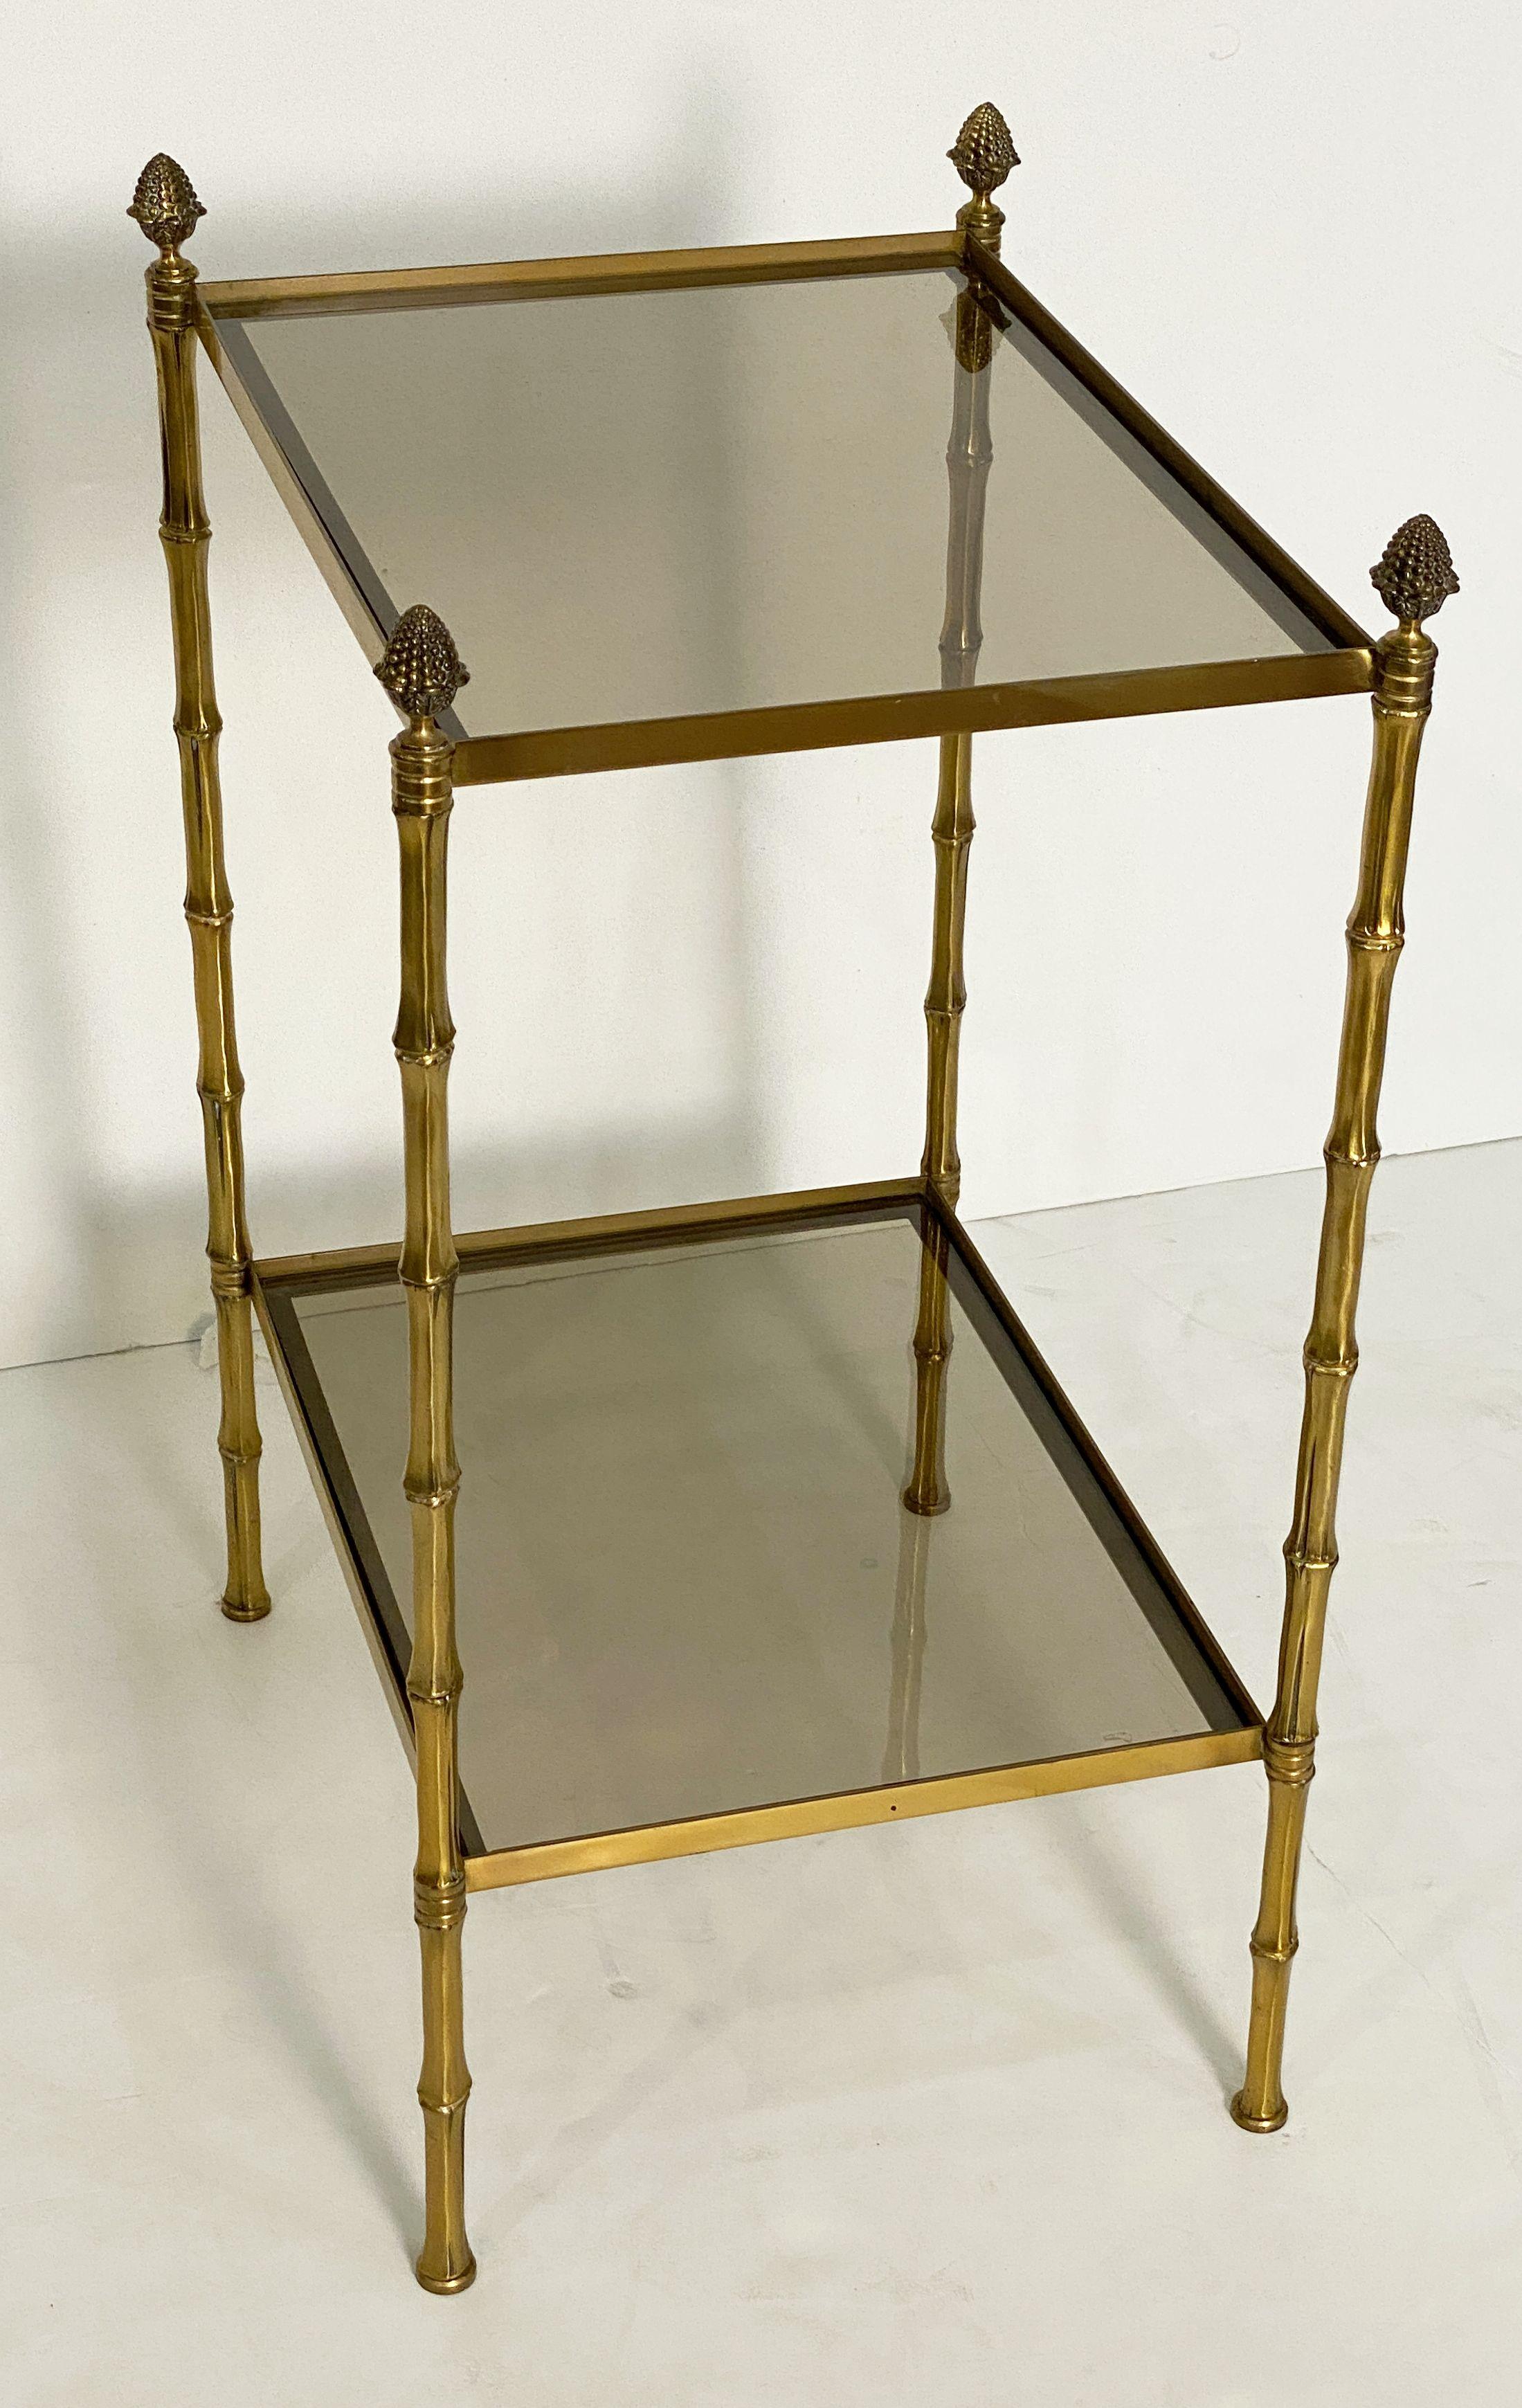 A fine French Mid-Century Modern rectangular end or side table, featuring two tiers of smoked glass and a stretcher frame of brass with finials and tapering legs with a faux bamboo design.